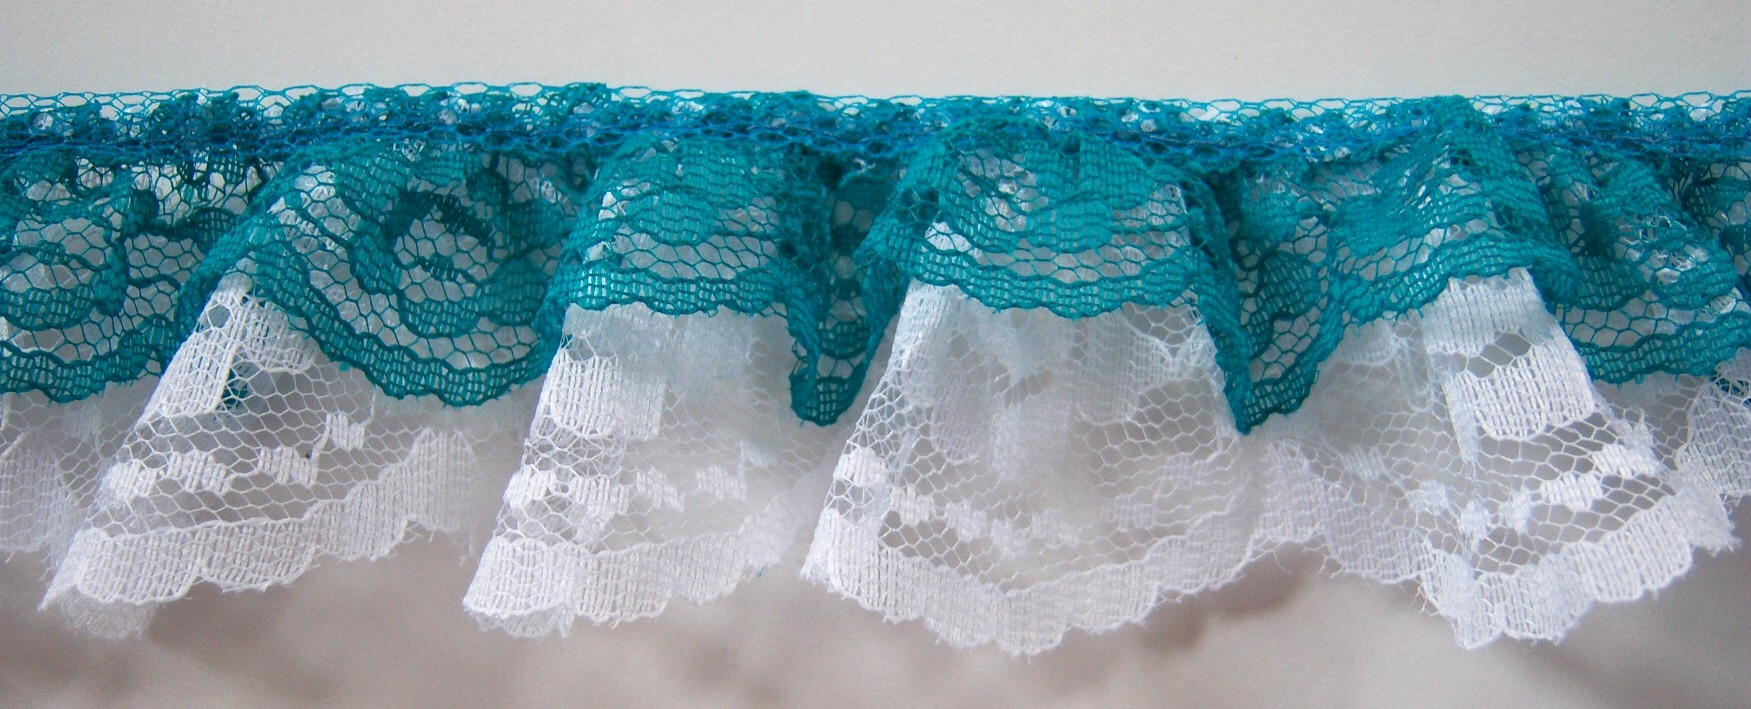 Teal/White Double Gathered Lace